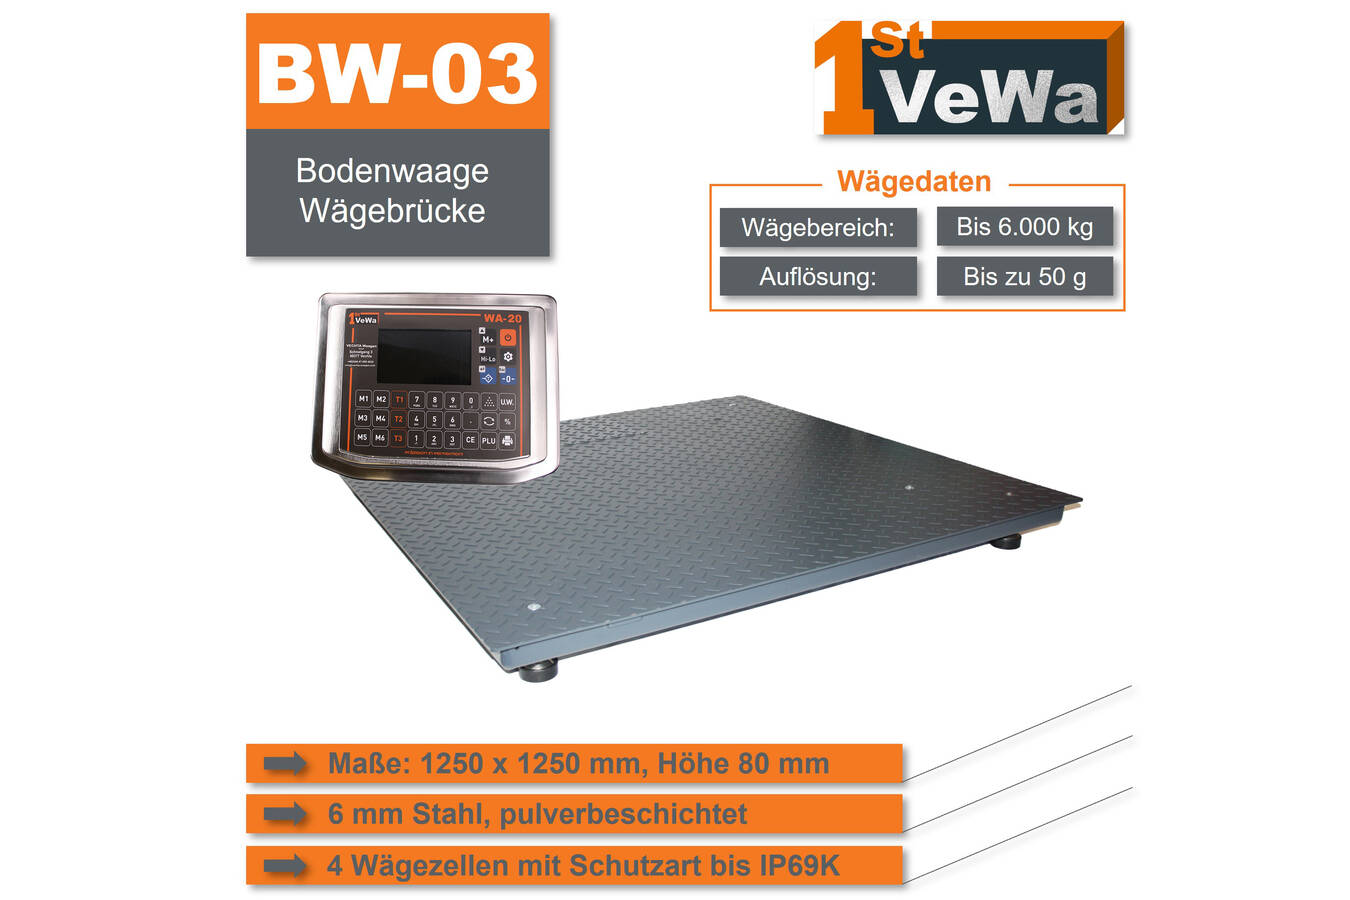 A floor scale in logistics Floor scales can be used in a variety of ways for all kinds of applications. In logistics, however, there are special requirements. You can read about these and how VECHTA Waagen GmbH implements them below.